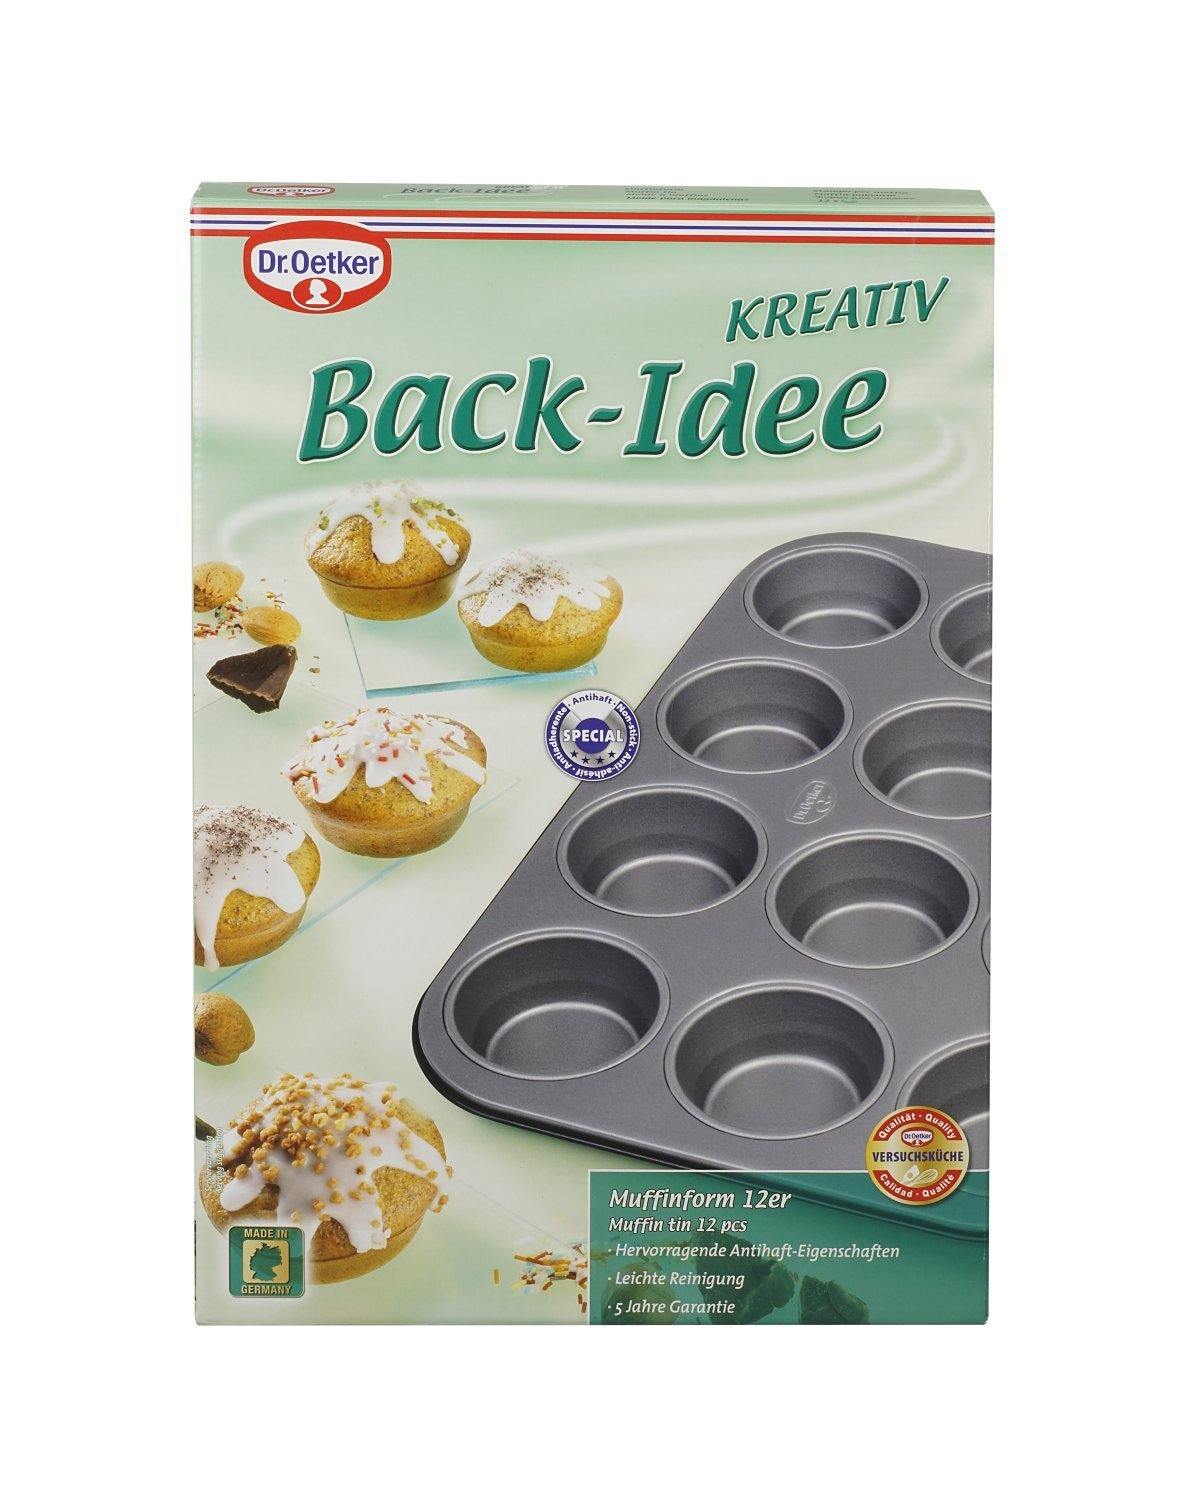 Dr. Oetker Muffin Tin 12 Cups "Back-Idee", Black, 26.5X38.5X3 cm - Whole and All